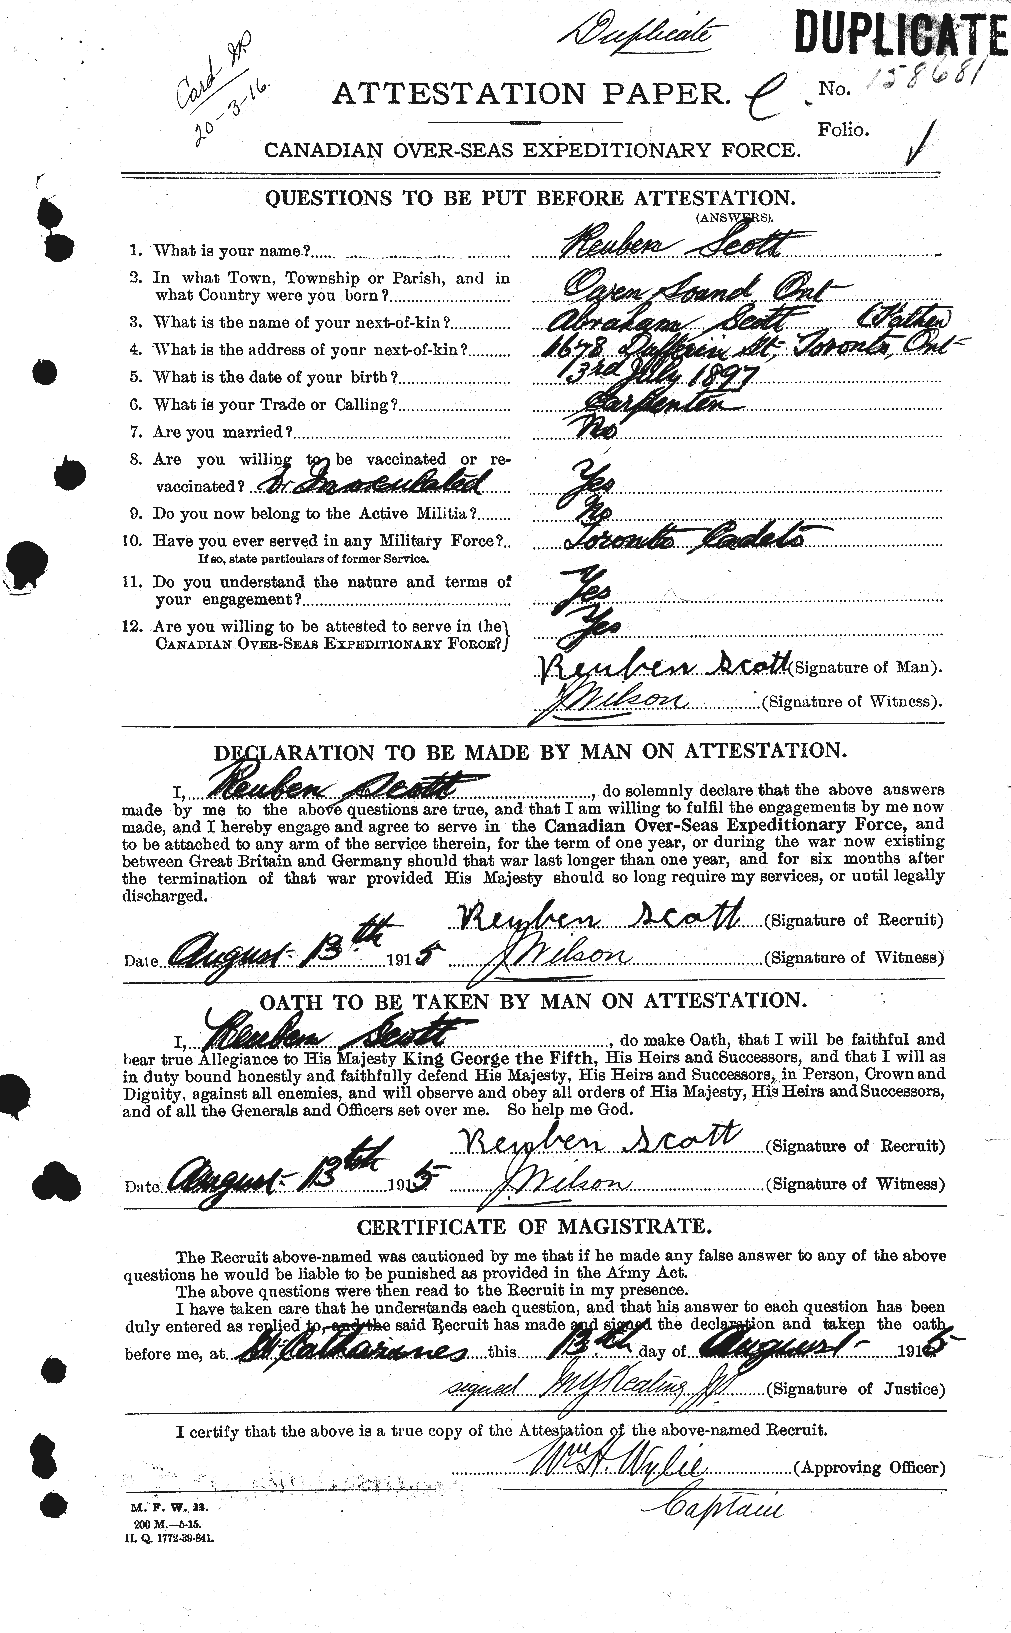 Personnel Records of the First World War - CEF 090188a